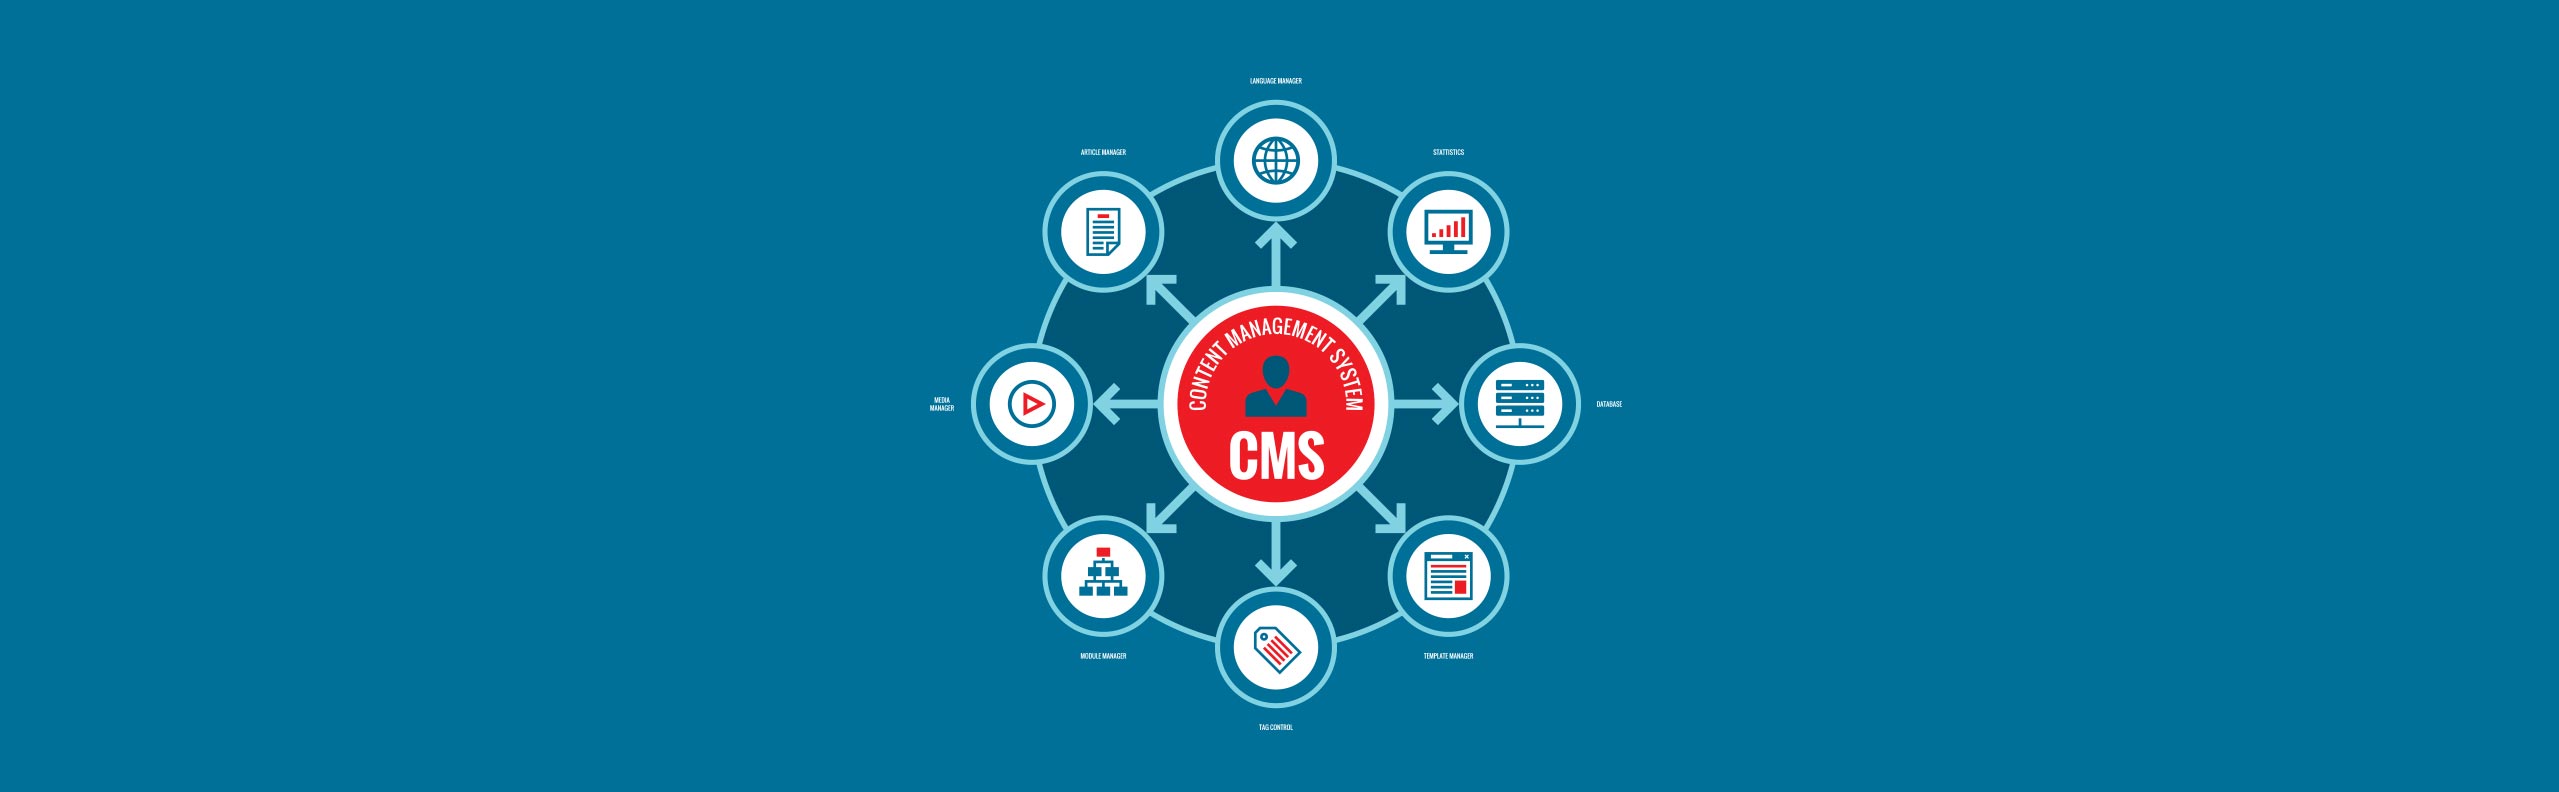 Best CMS For SEO